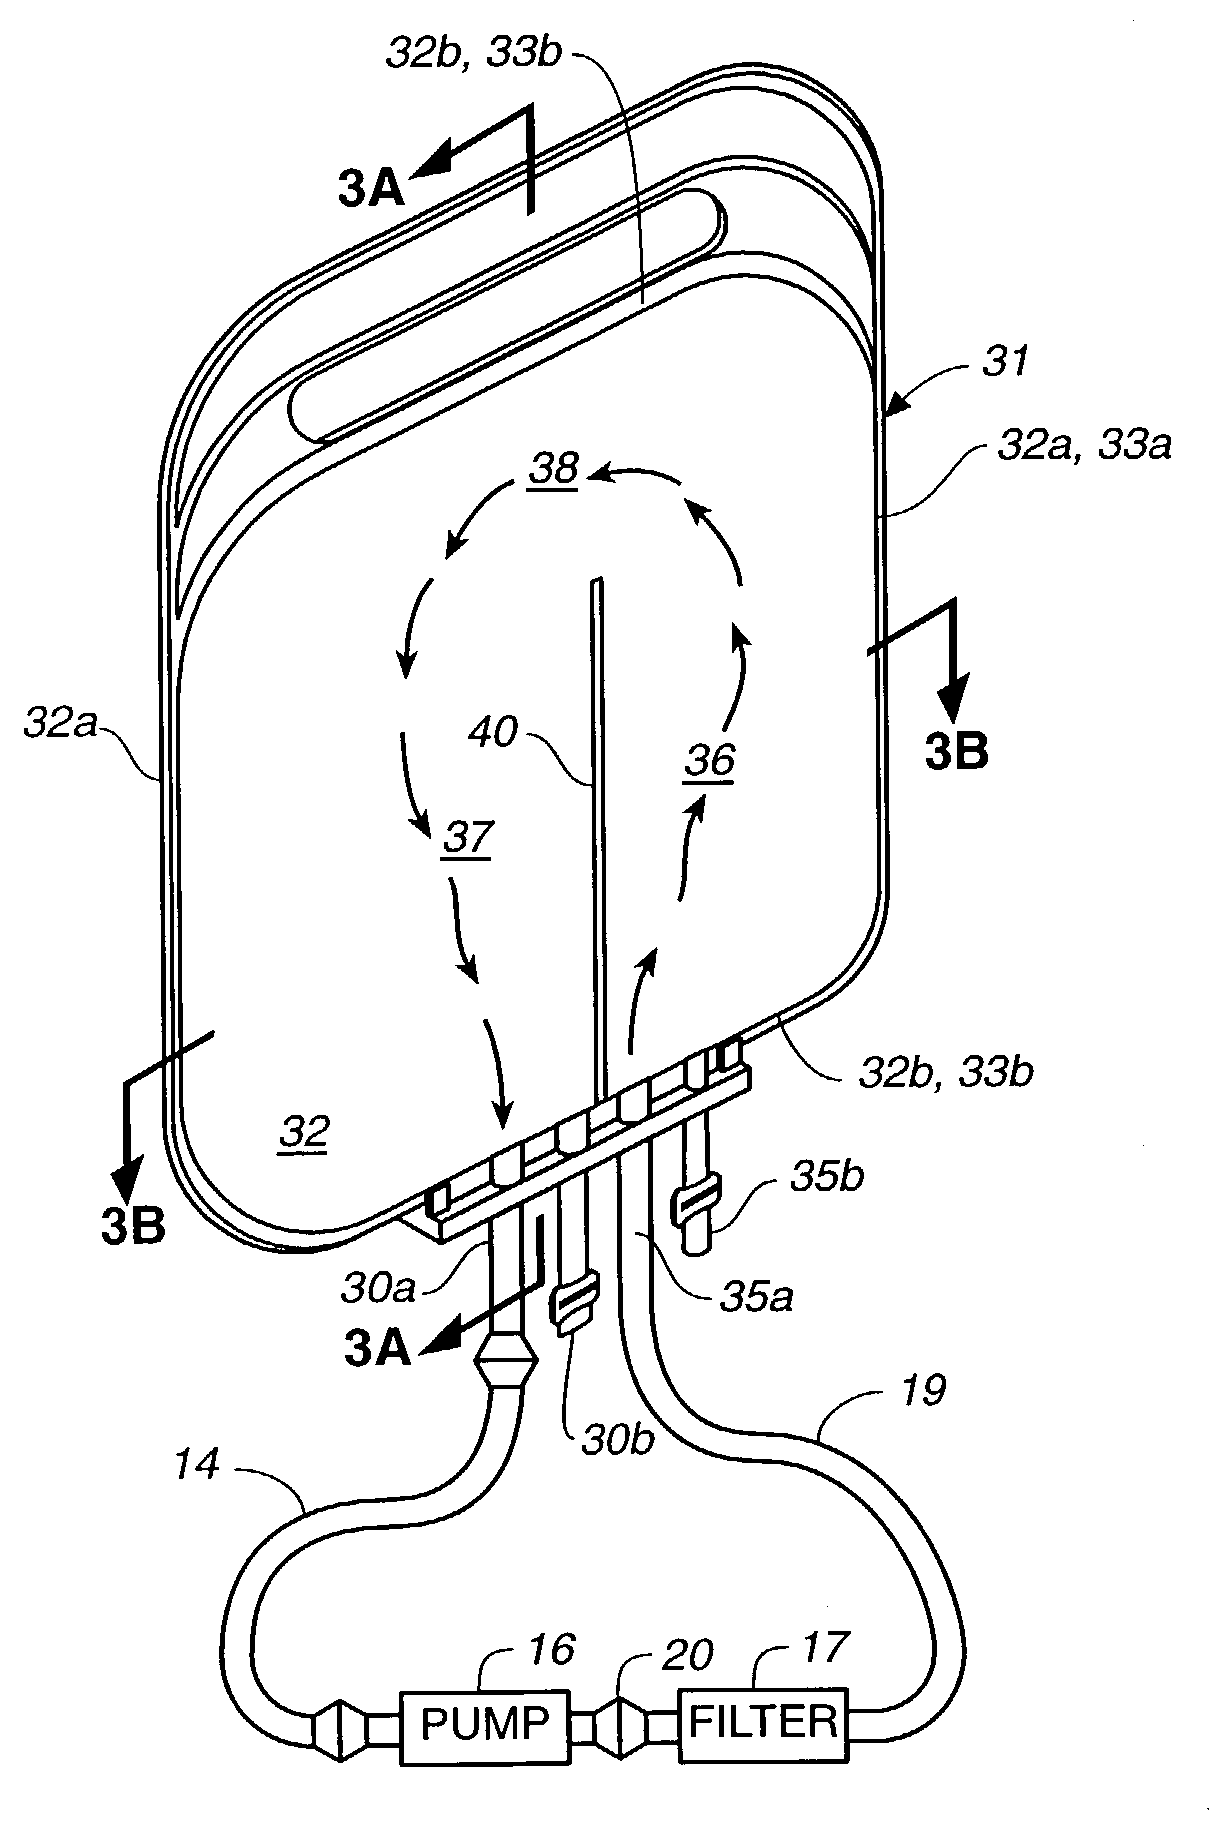 Disposable container for use in fluid processing